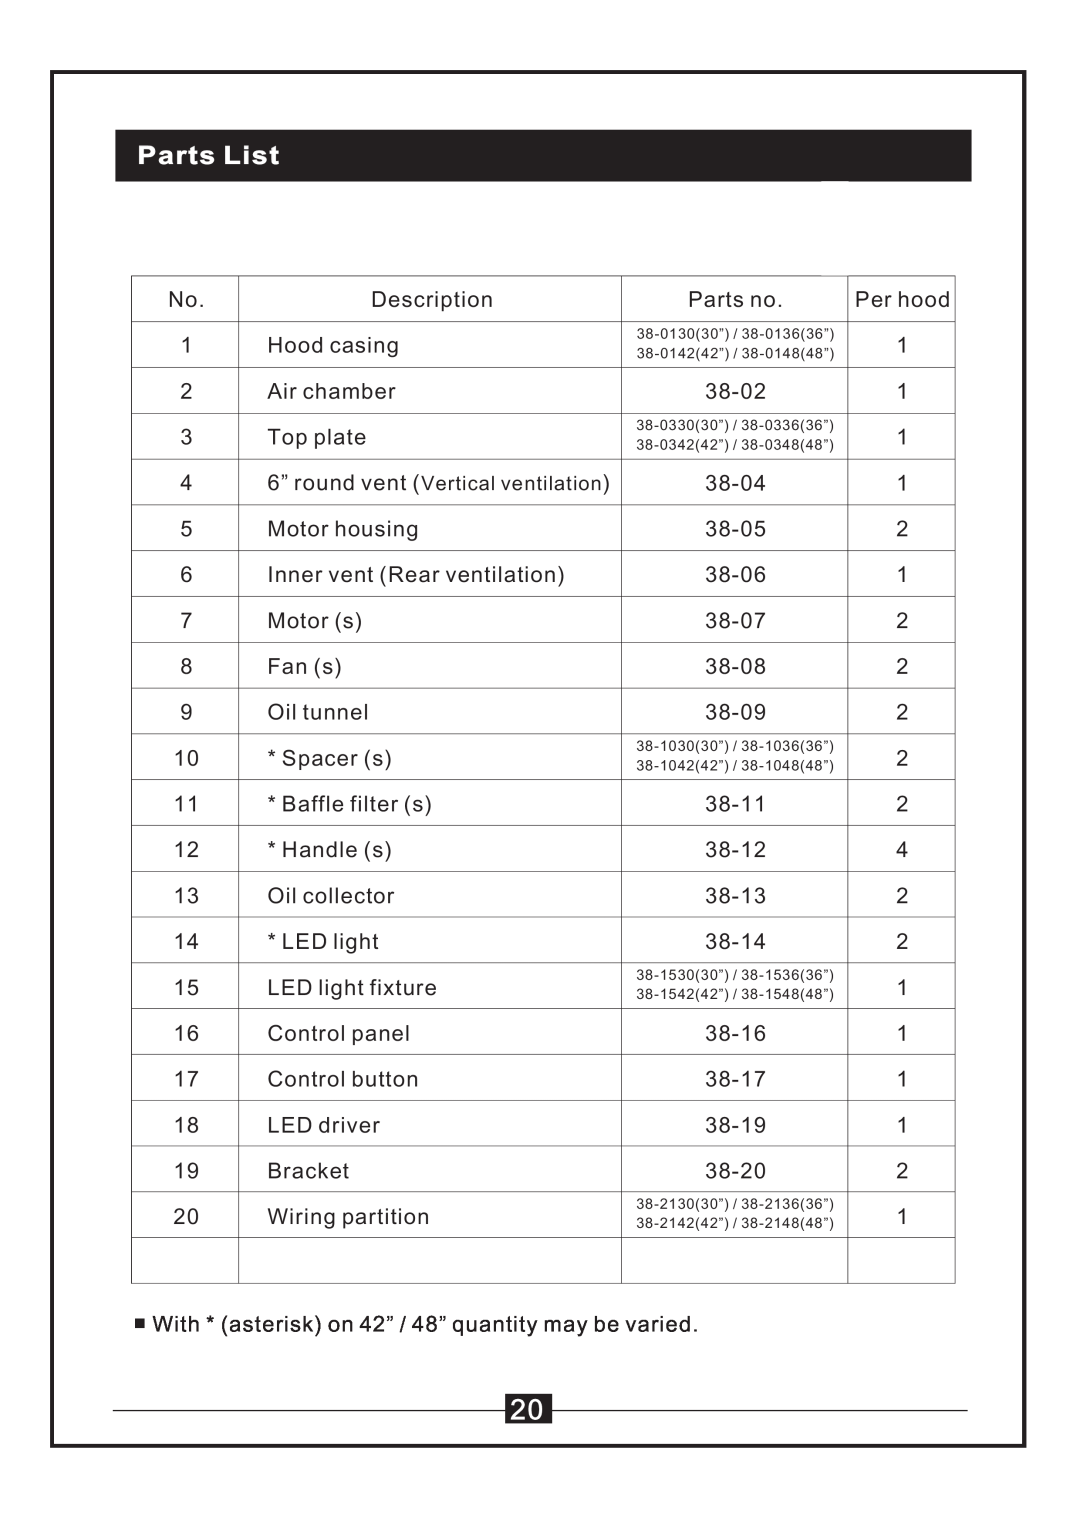 Windster WS-38 manual Parts List 